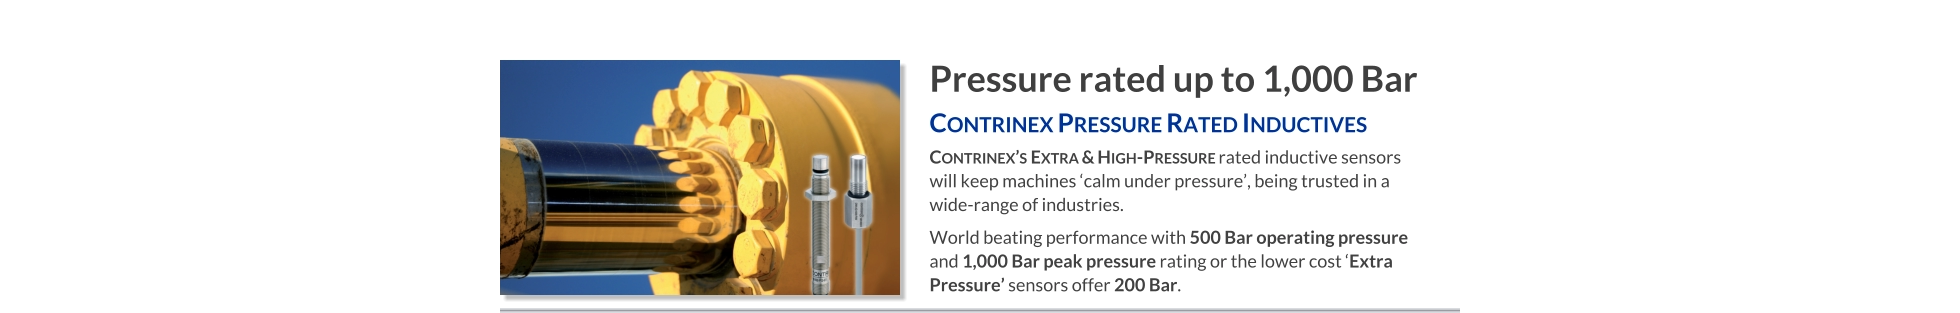 Pressure rated up to 1,000 Bar Contrinex Pressure Rated Inductives   Contrinex’s Extra & High-Pressure rated inductive sensors will keep machines ‘calm under pressure’, being trusted in a wide-range of industries. World beating performance with 500 Bar operating pressure and 1,000 Bar peak pressure rating or the lower cost ‘Extra Pressure’ sensors offer 200 Bar.